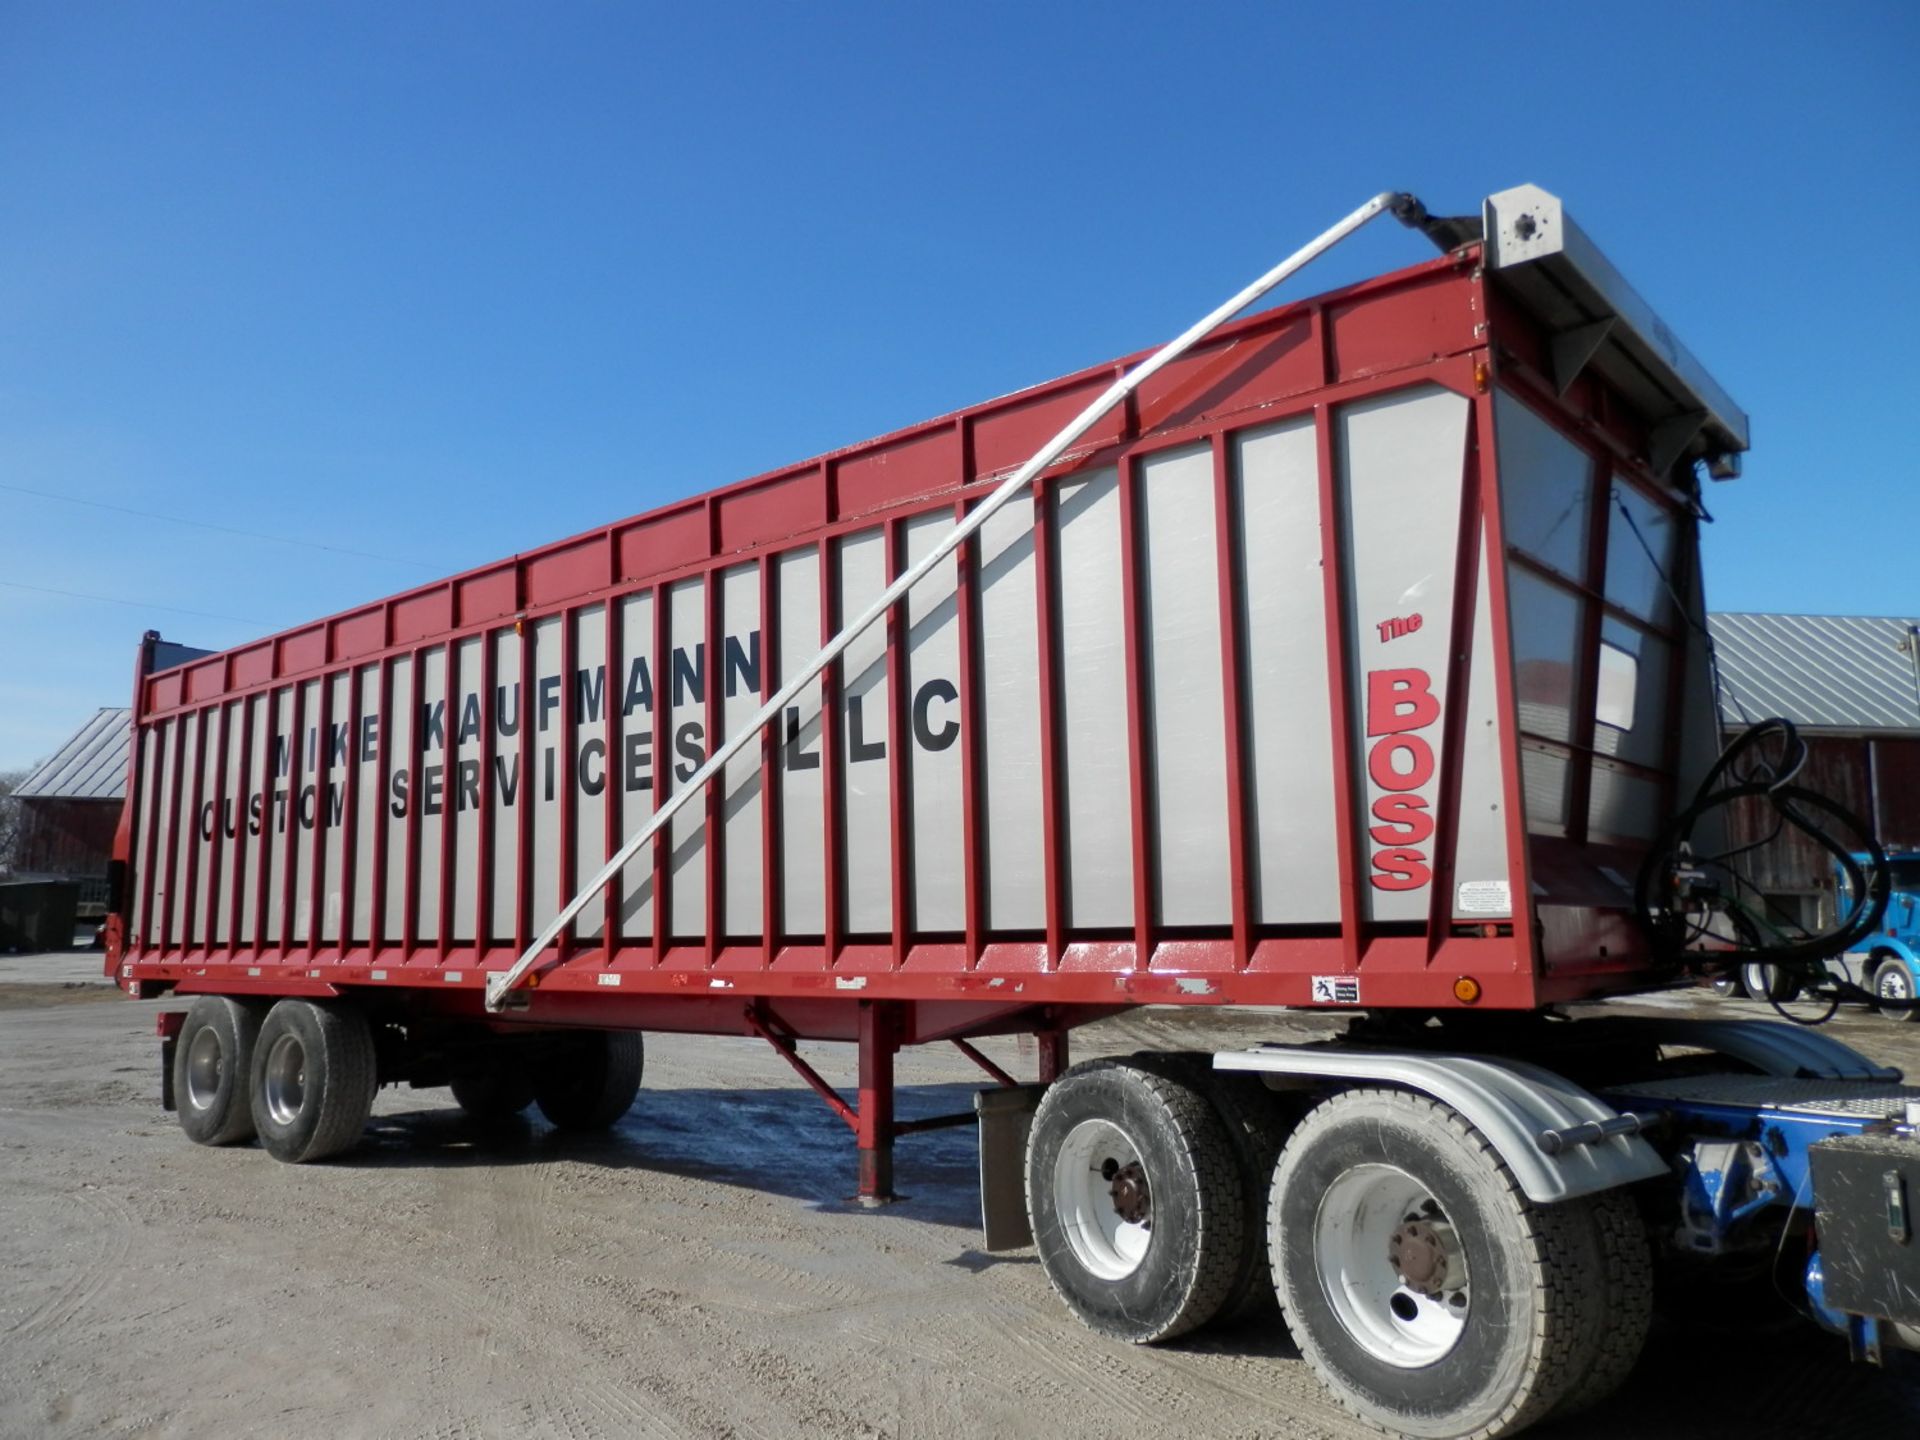 2006 MEYER 9136 "THE BOSS" 36' FORAGE TRAILER - Image 7 of 11